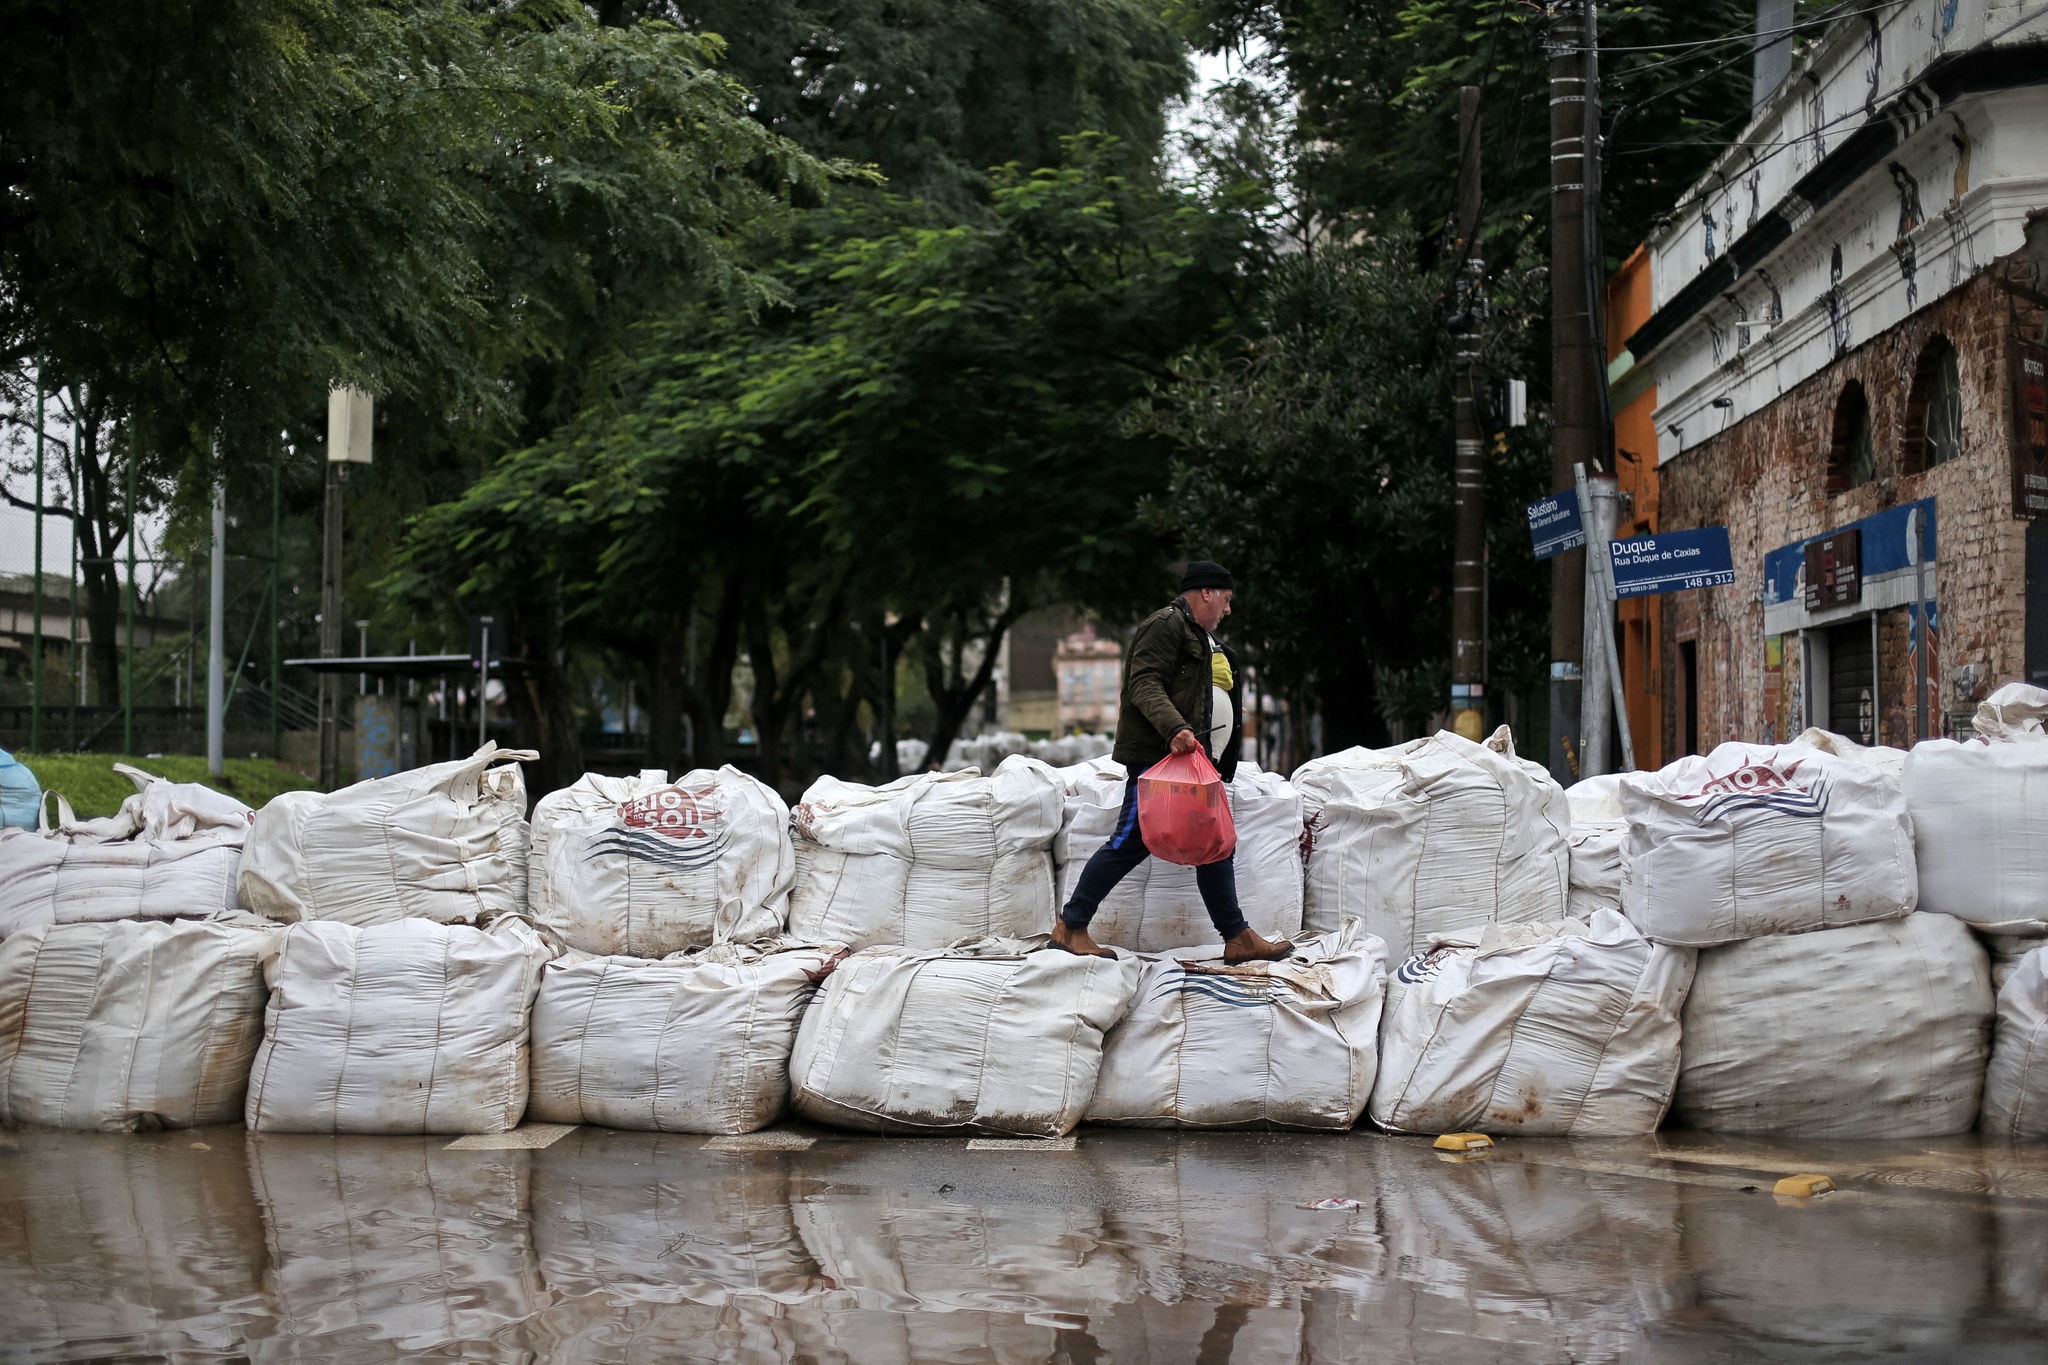 A man walks on a barrier made with bags full of rocks and sand at the historical city center of Porto Alegre, Rio Grande do Sul, Brazil on May 12, 2024. New rains in waterlogged southern Brazil are expected to be heaviest between Sunday and Monday, authorities have warned, bringing fresh misery to victims of flooding that has killed 136 people and left 806 injured and 125 missing so far. (Photo by Anselmo CUNHA / AFP)